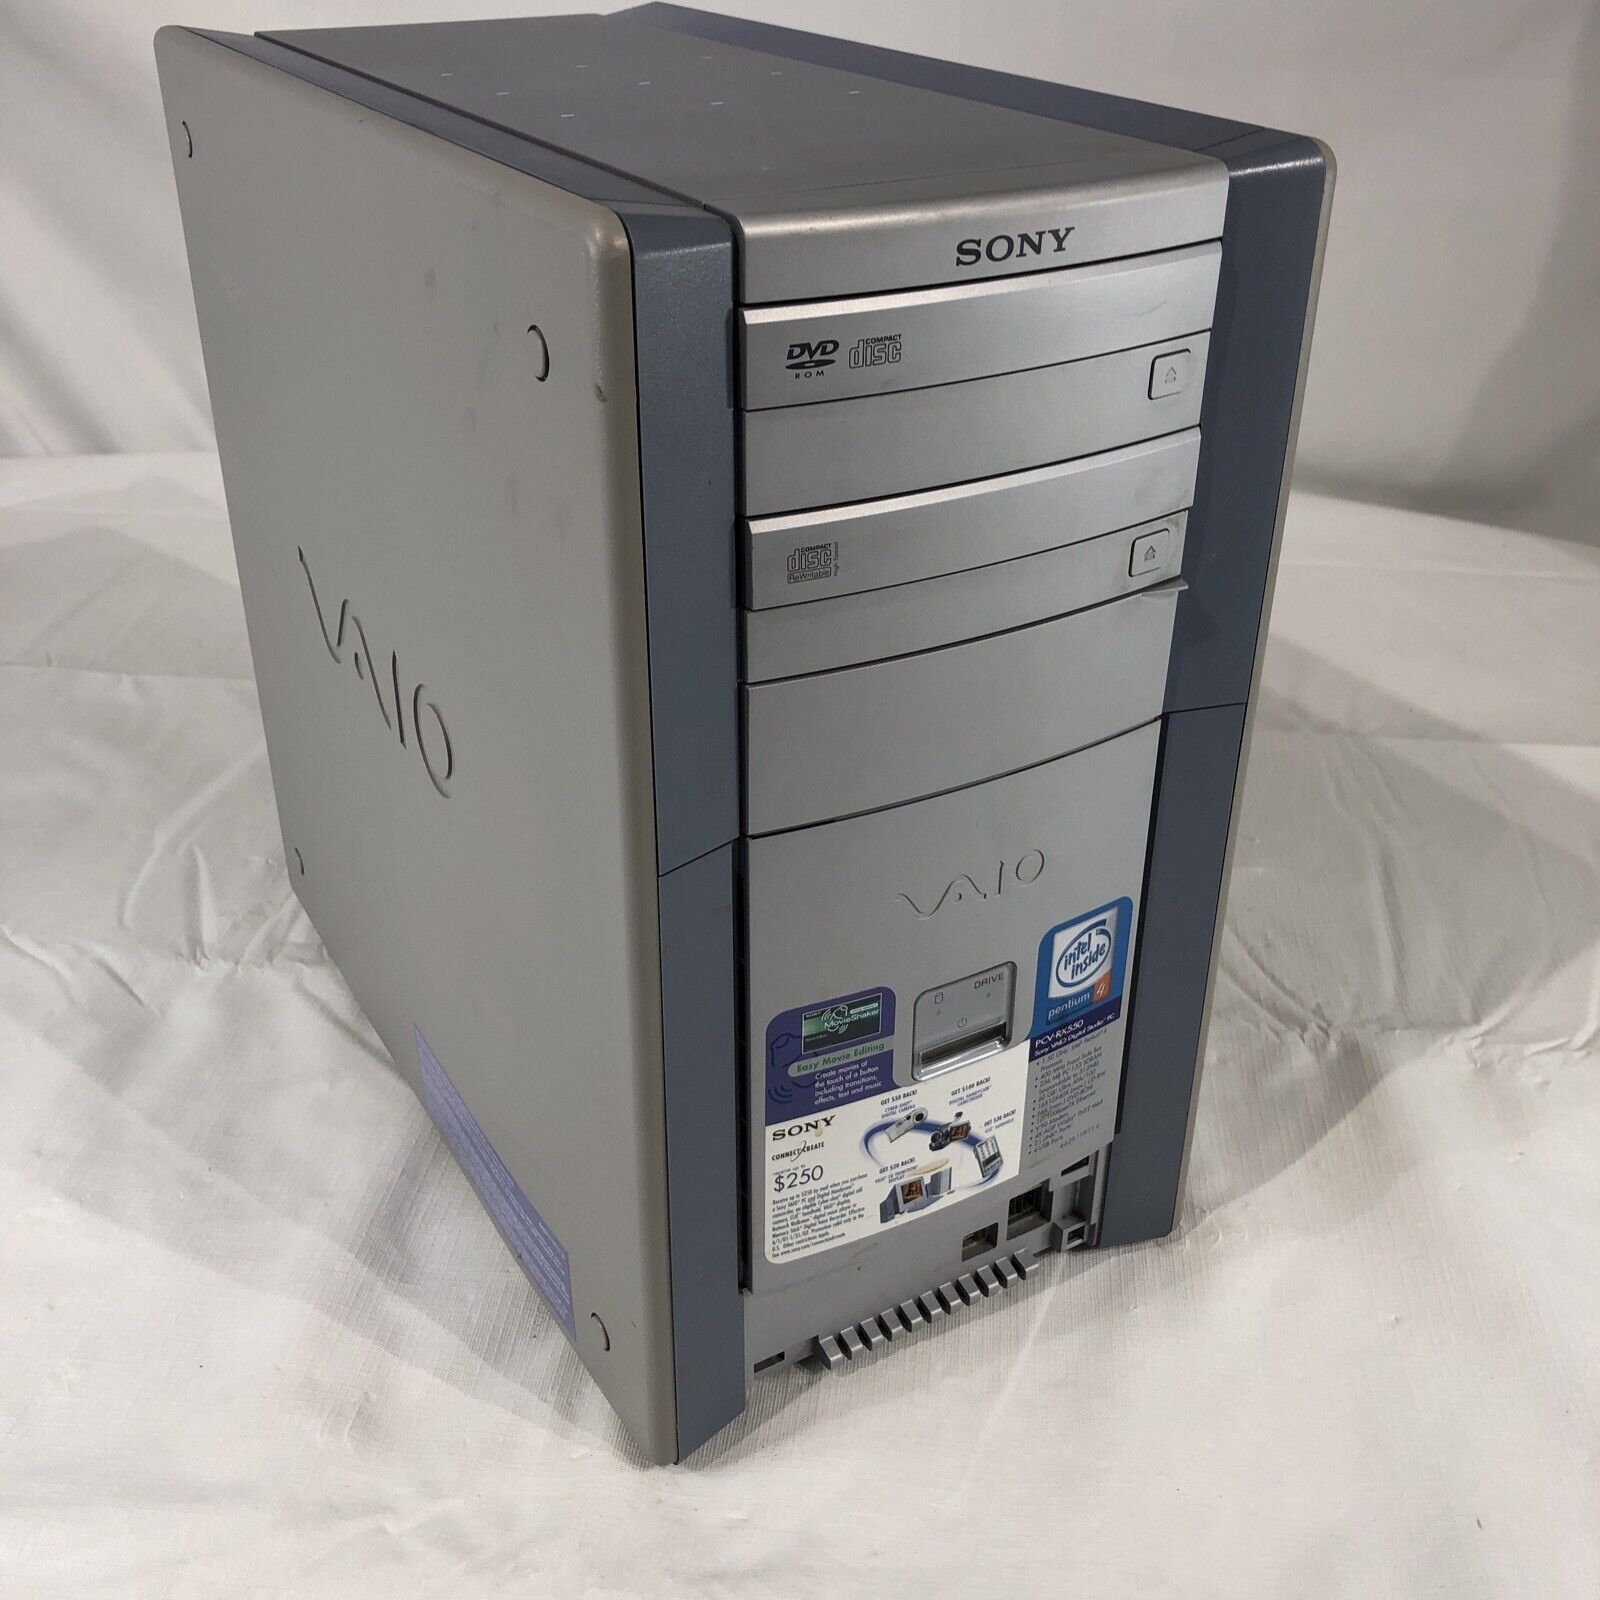 Vintage Sony VAIO PCV-RX550 Tower Pentium 4 @1.5GHz 256MB RAM No HDD/OS